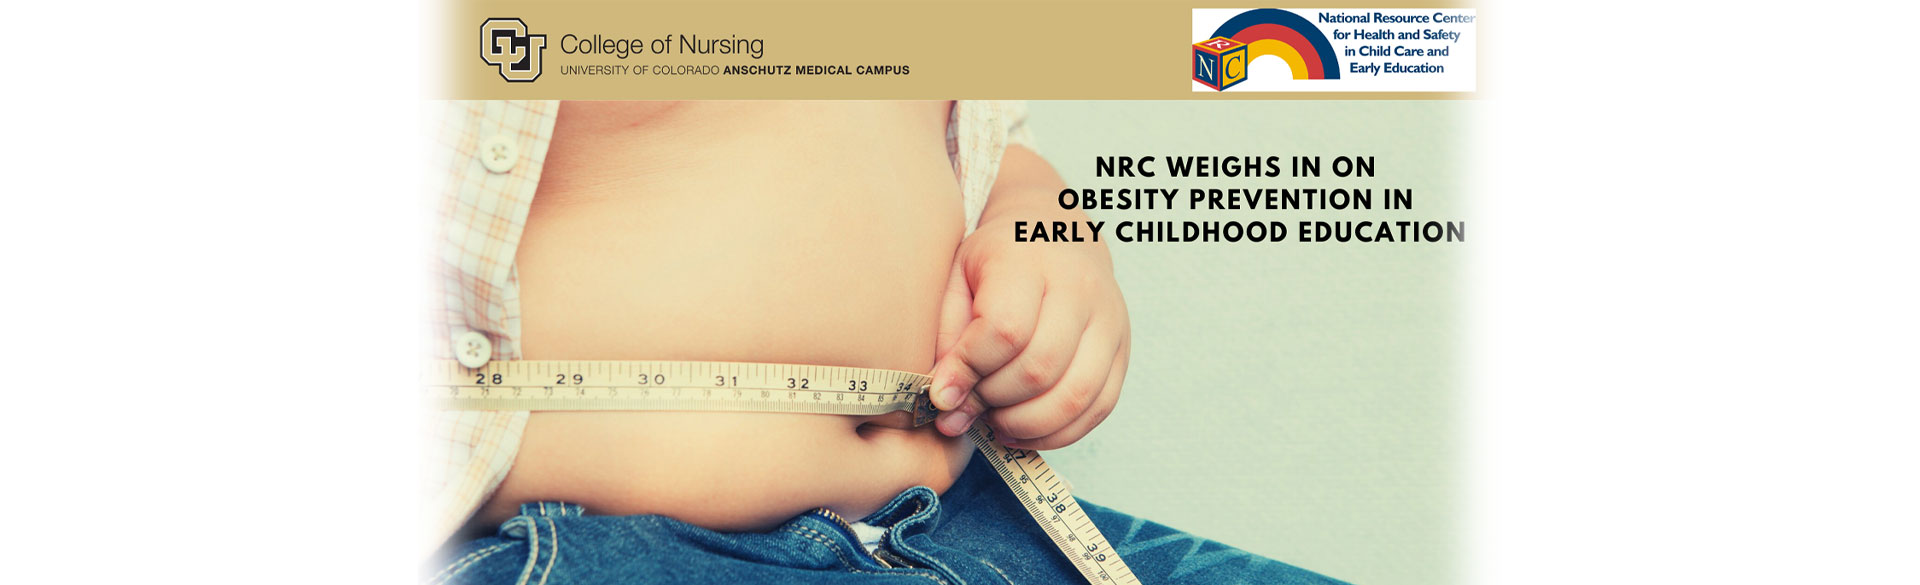 NRC Weighs in on Obesity Prevention in Early Childhood Education